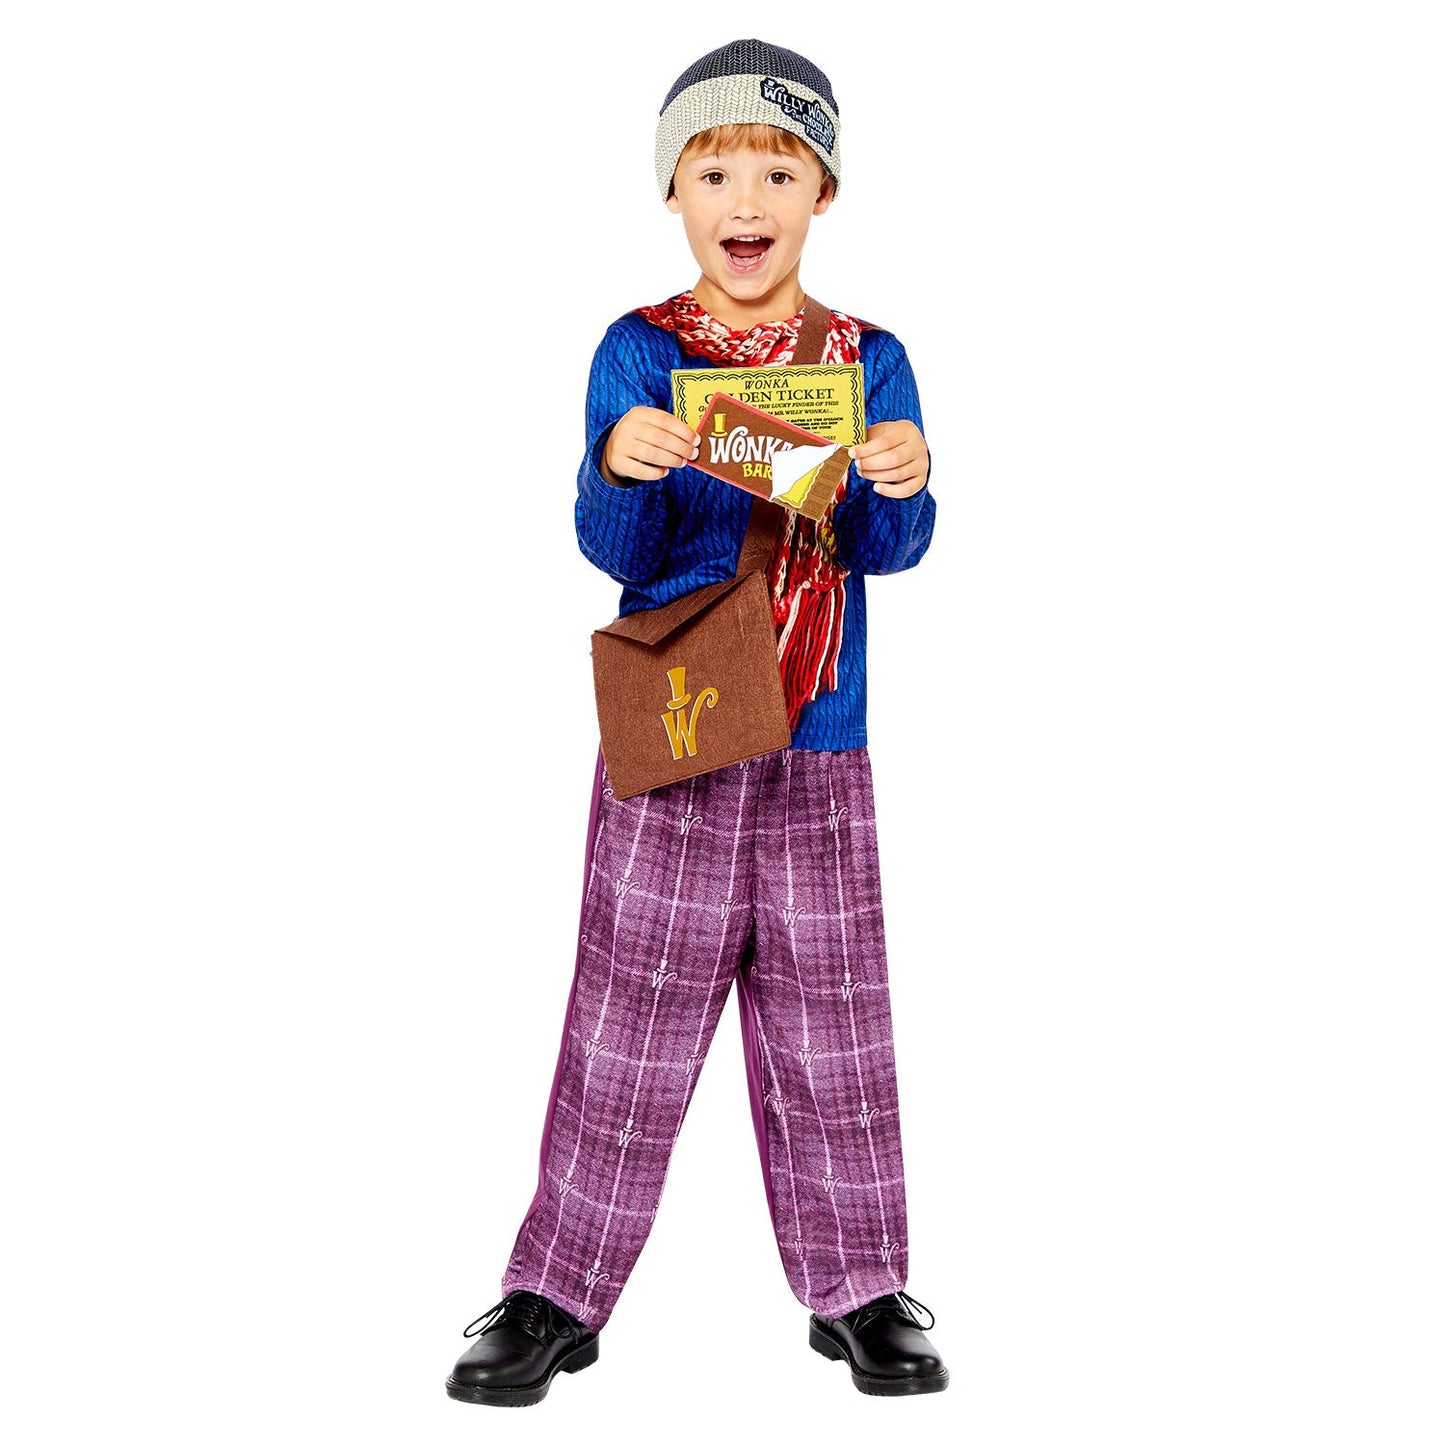 Charlie Bucket Costume includes printed top| trousers| hat| bag with felt golden ticket| wonka bar and invite